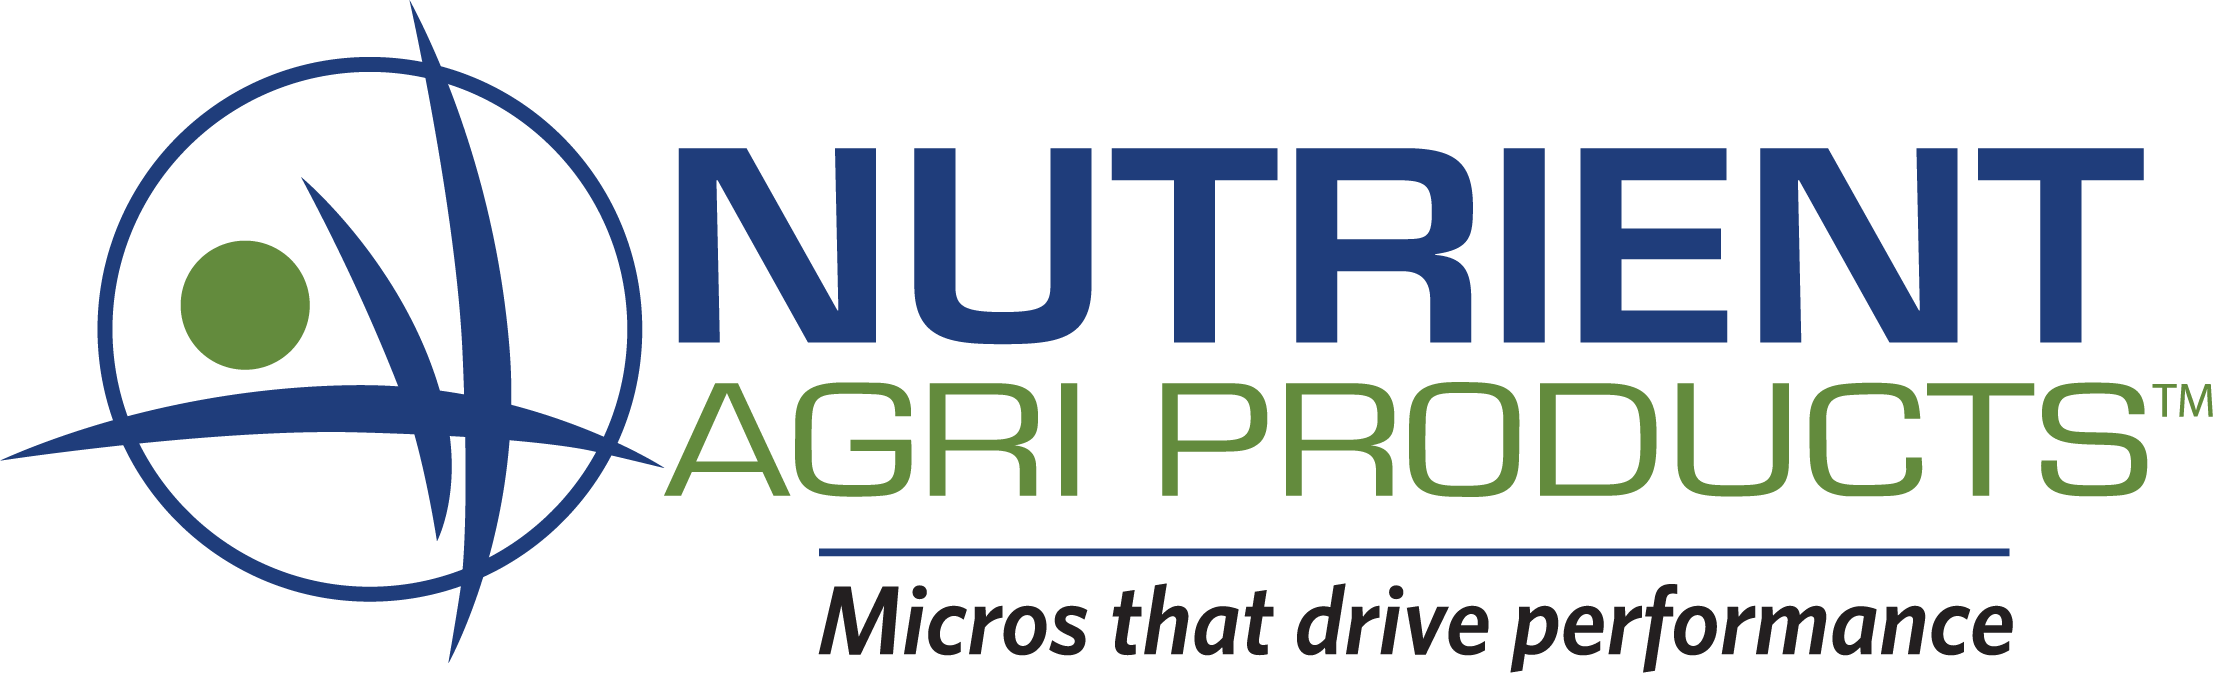 Nutrient Agri Products